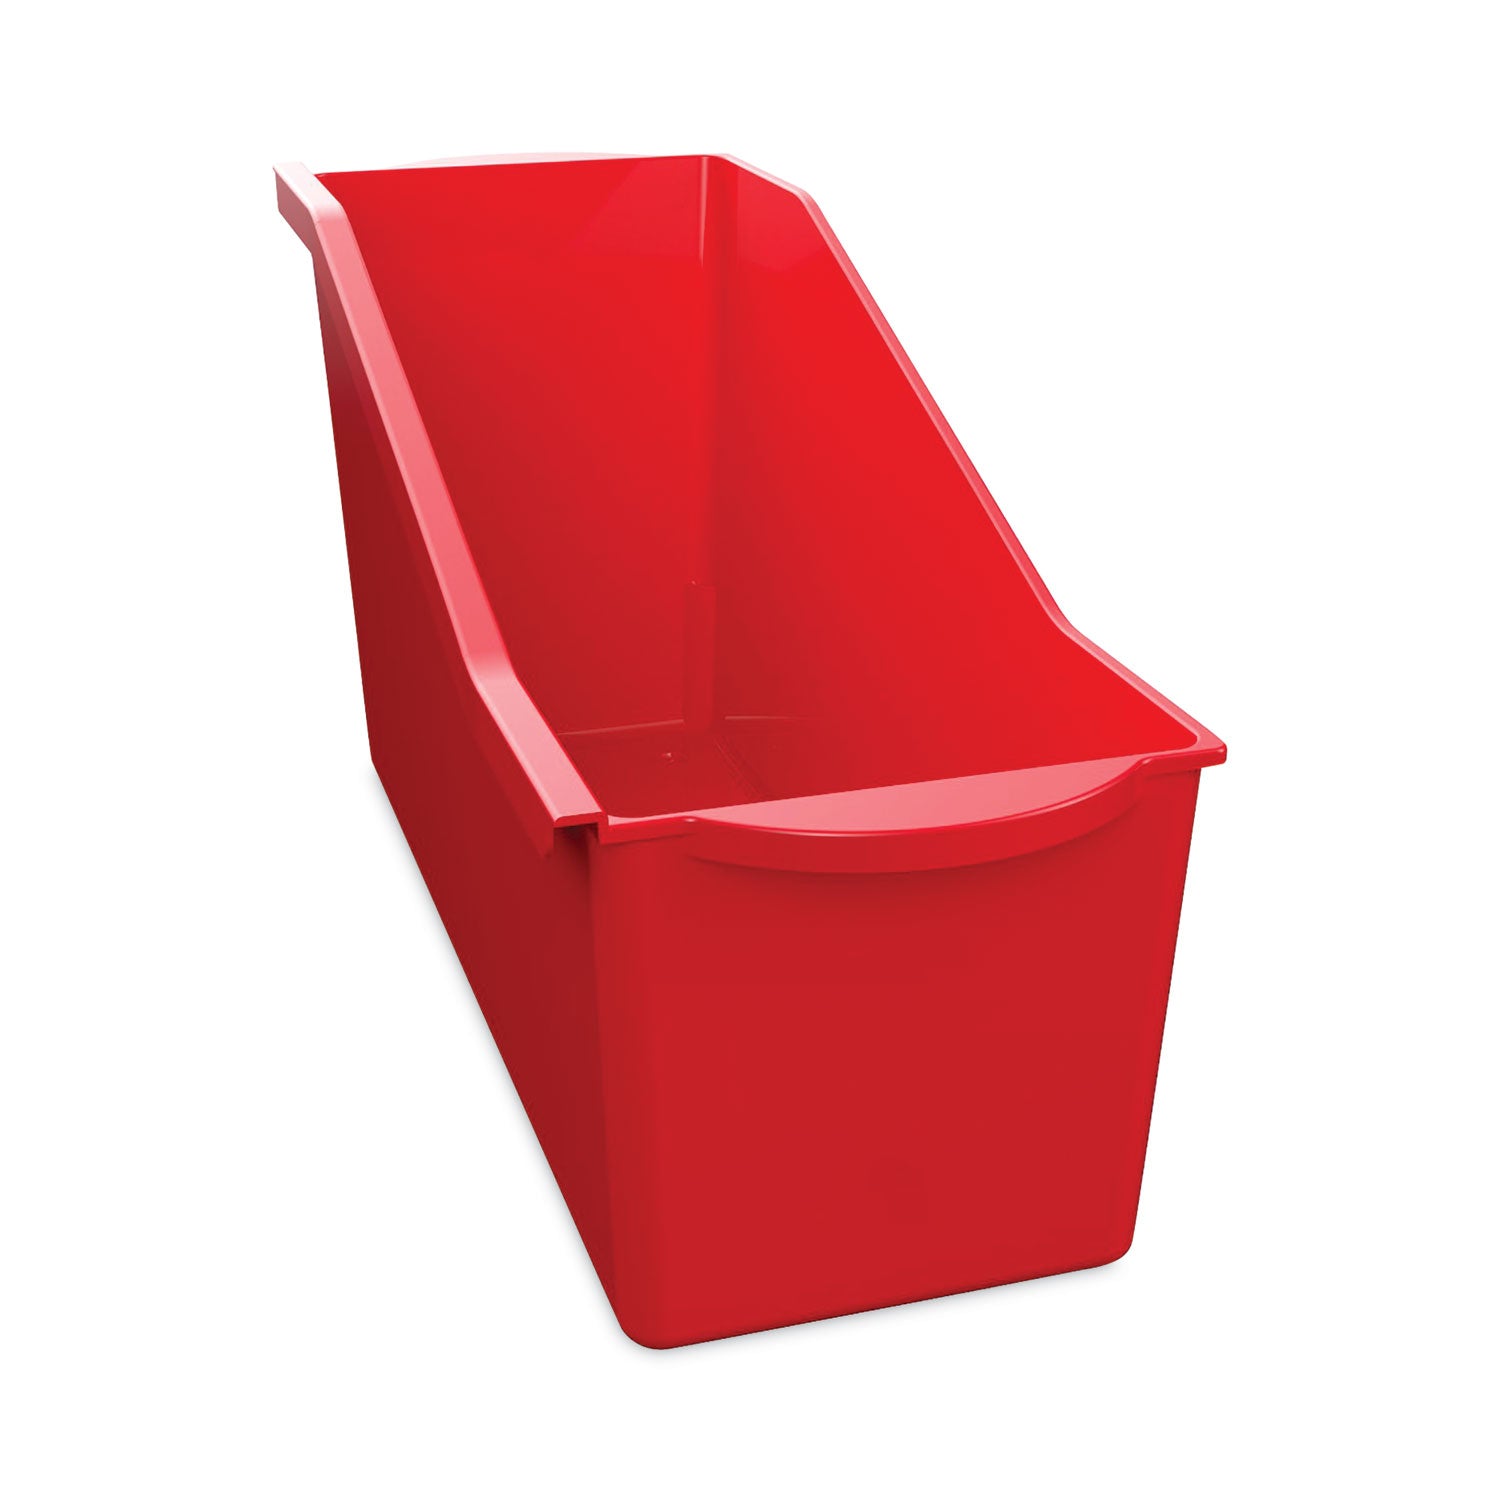 antimicrobial-book-bin-142-x-534-x-735-red_def39508red - 1